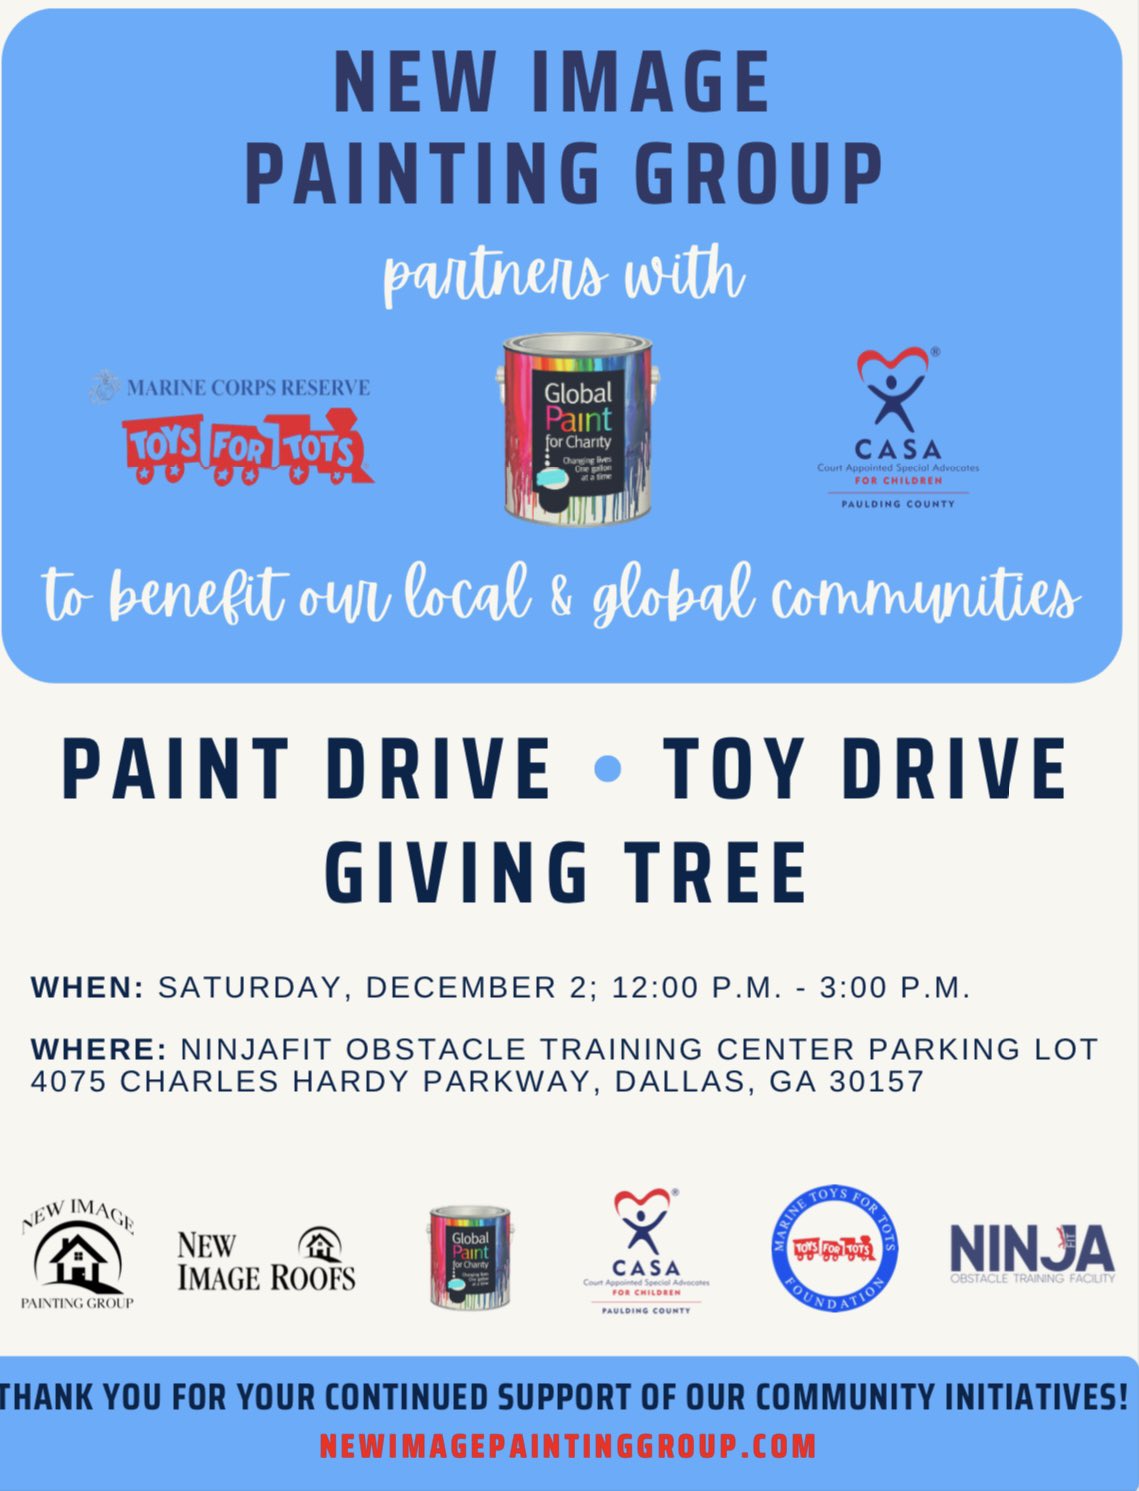 New Image Painting Group Partners with Global Paint for Charity, Henry, Georgia, United States